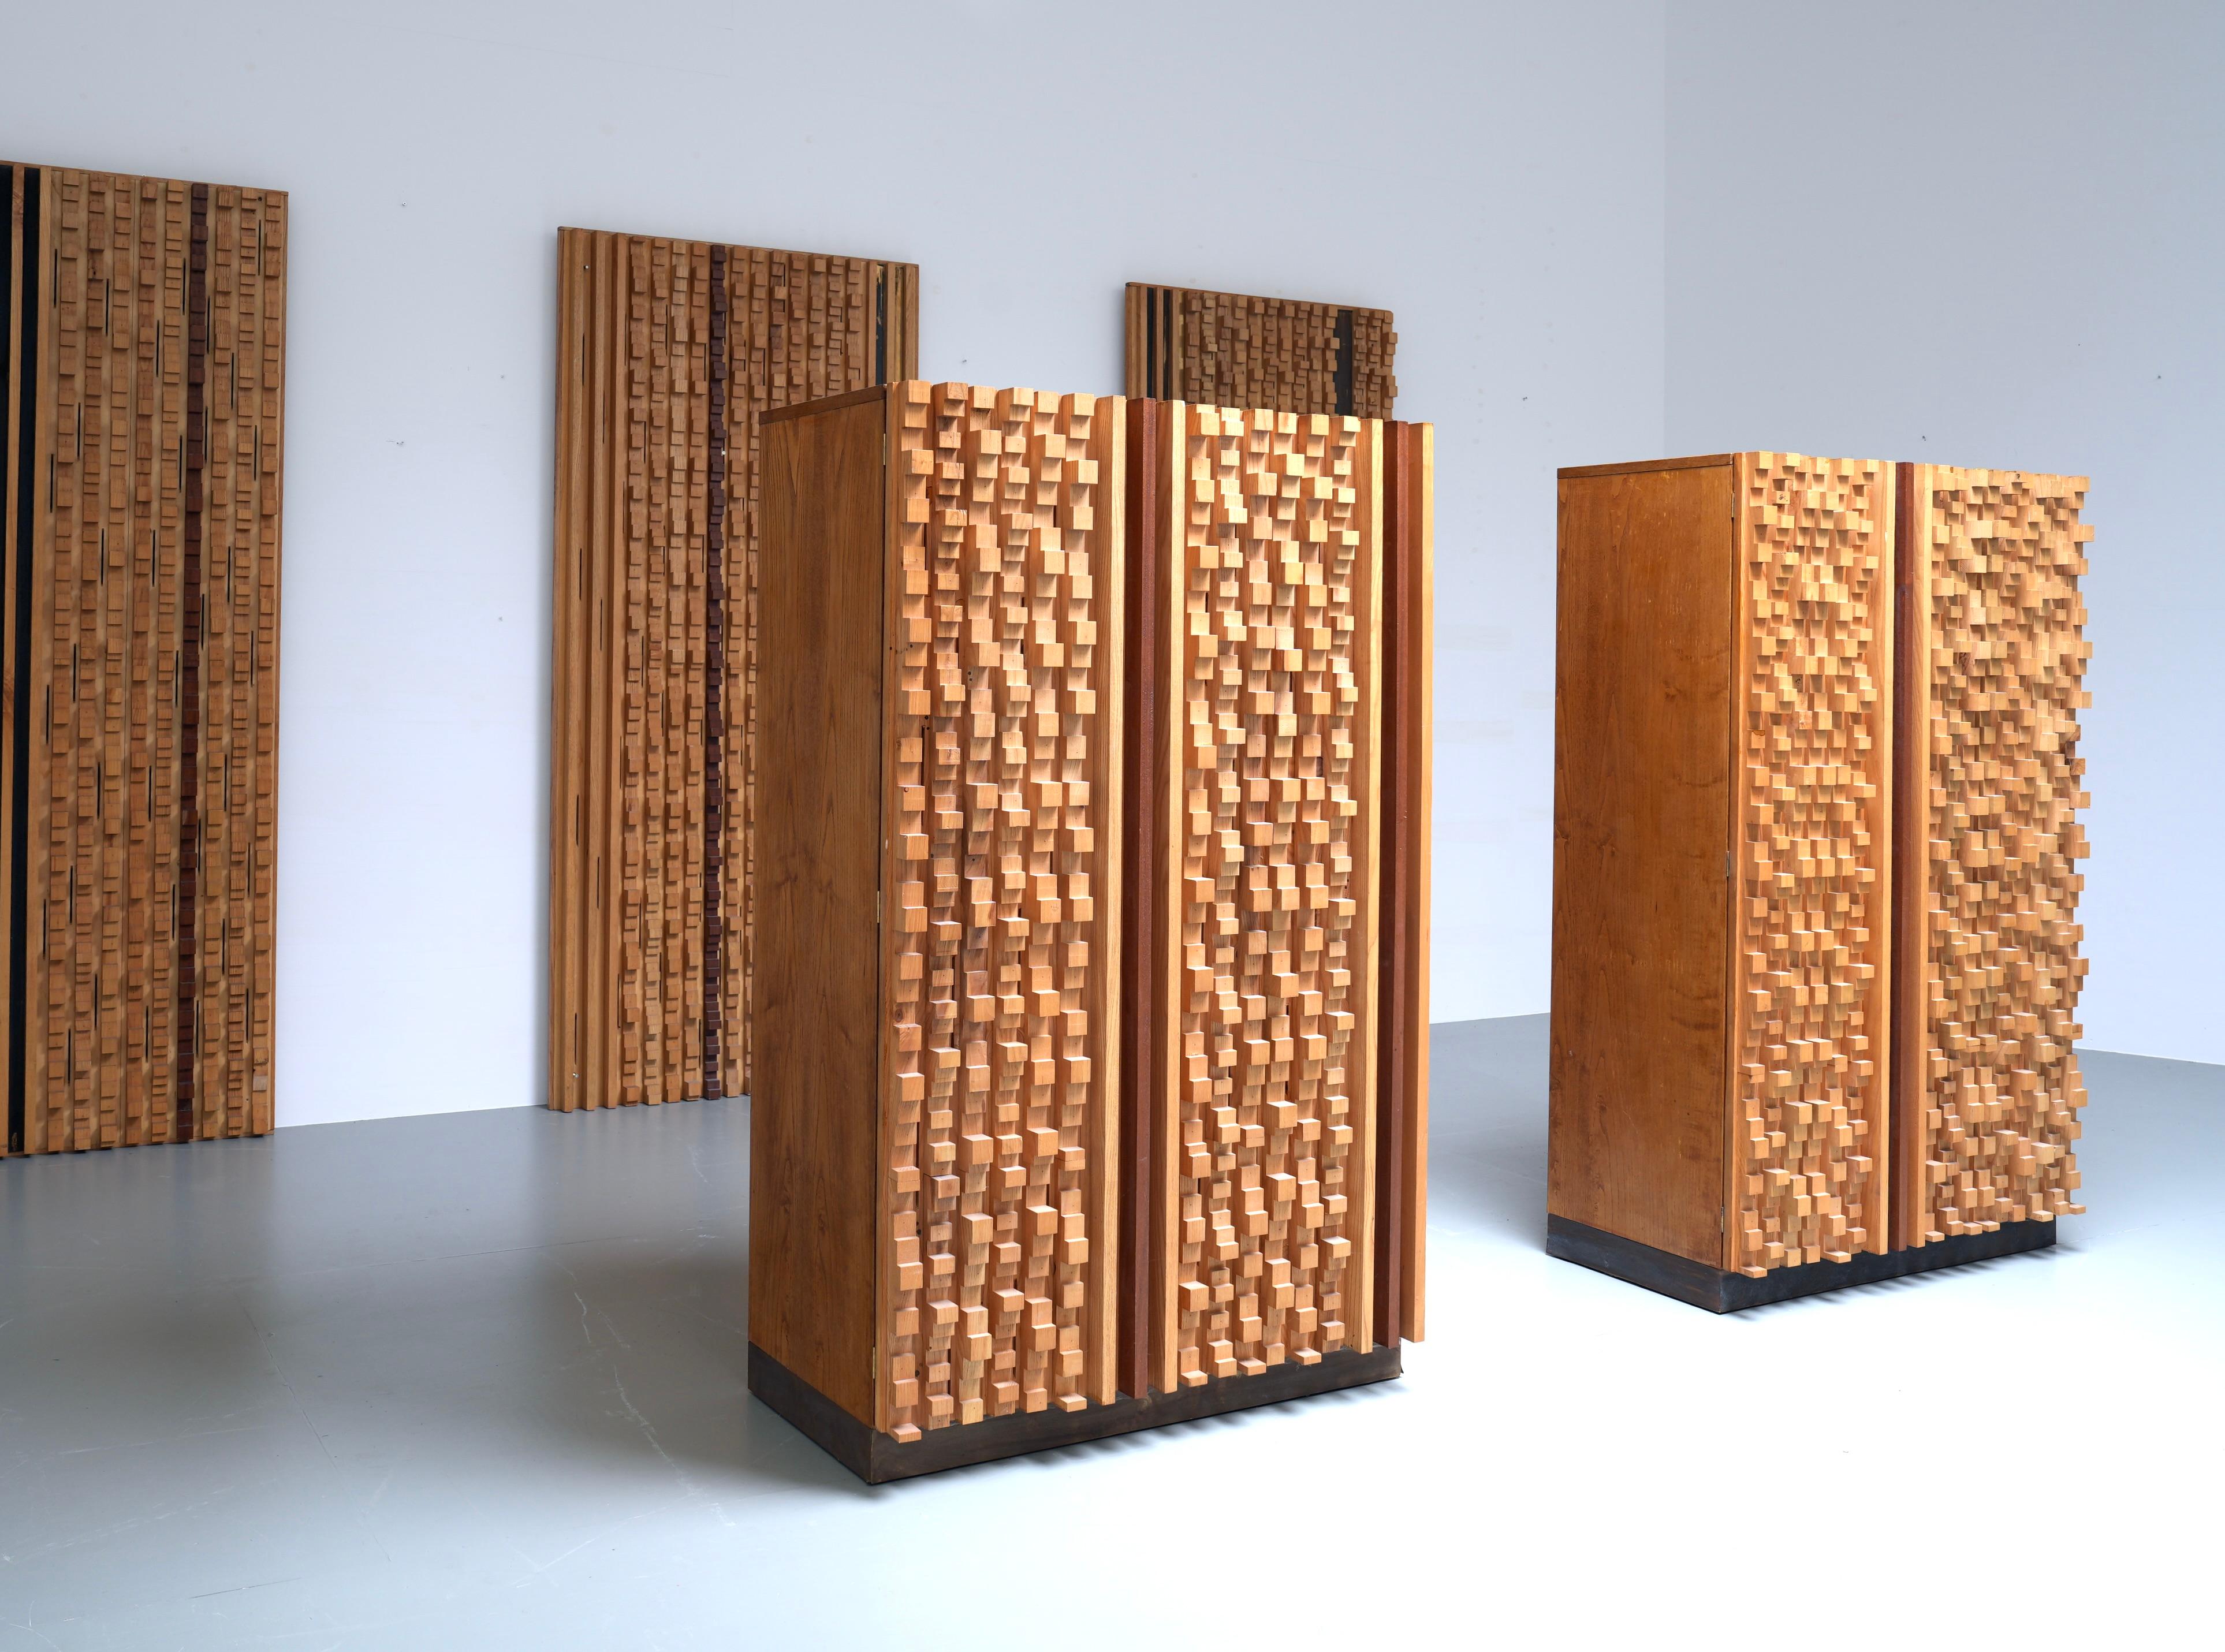 Unique and custom built set of 3 Wall Panels and 2 brutalist Cabinets by the Italian sculptor Stefano d’Amico in ash and brass, signed and dated, 1974.

There is not so much known about D'Amico's work apart from that he held expositions in Milan and